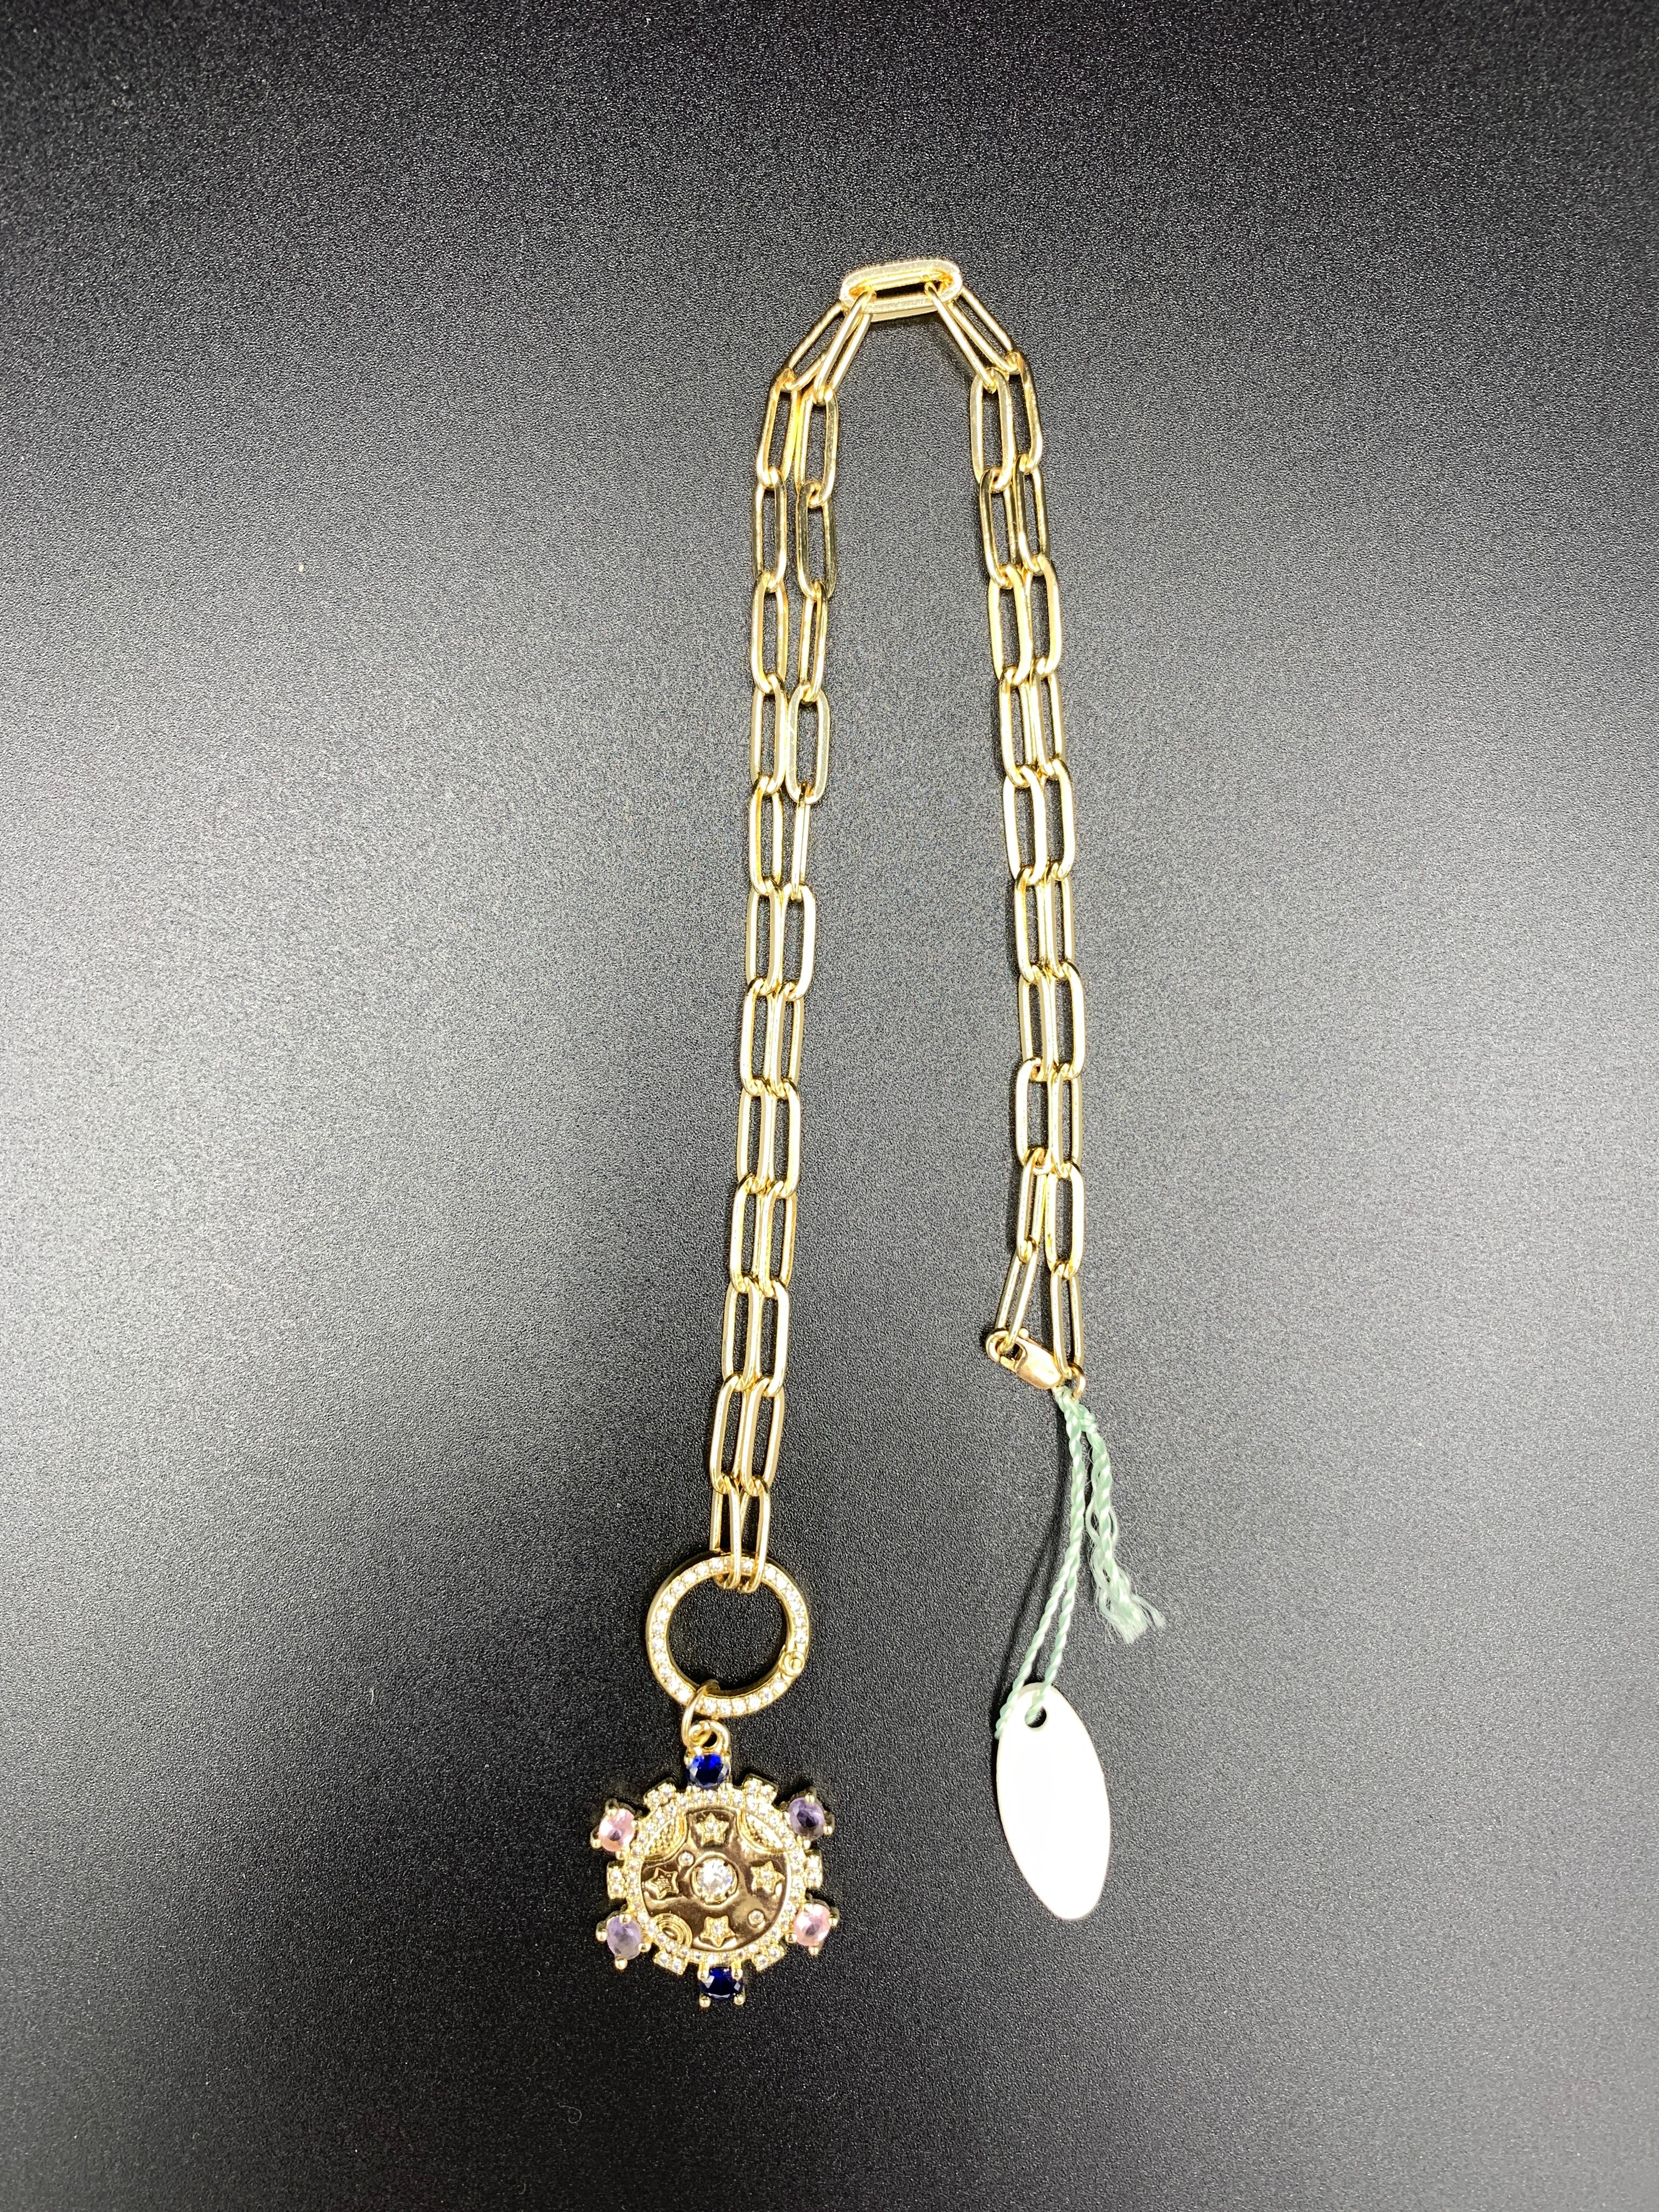 Chain with toggle and removable charm